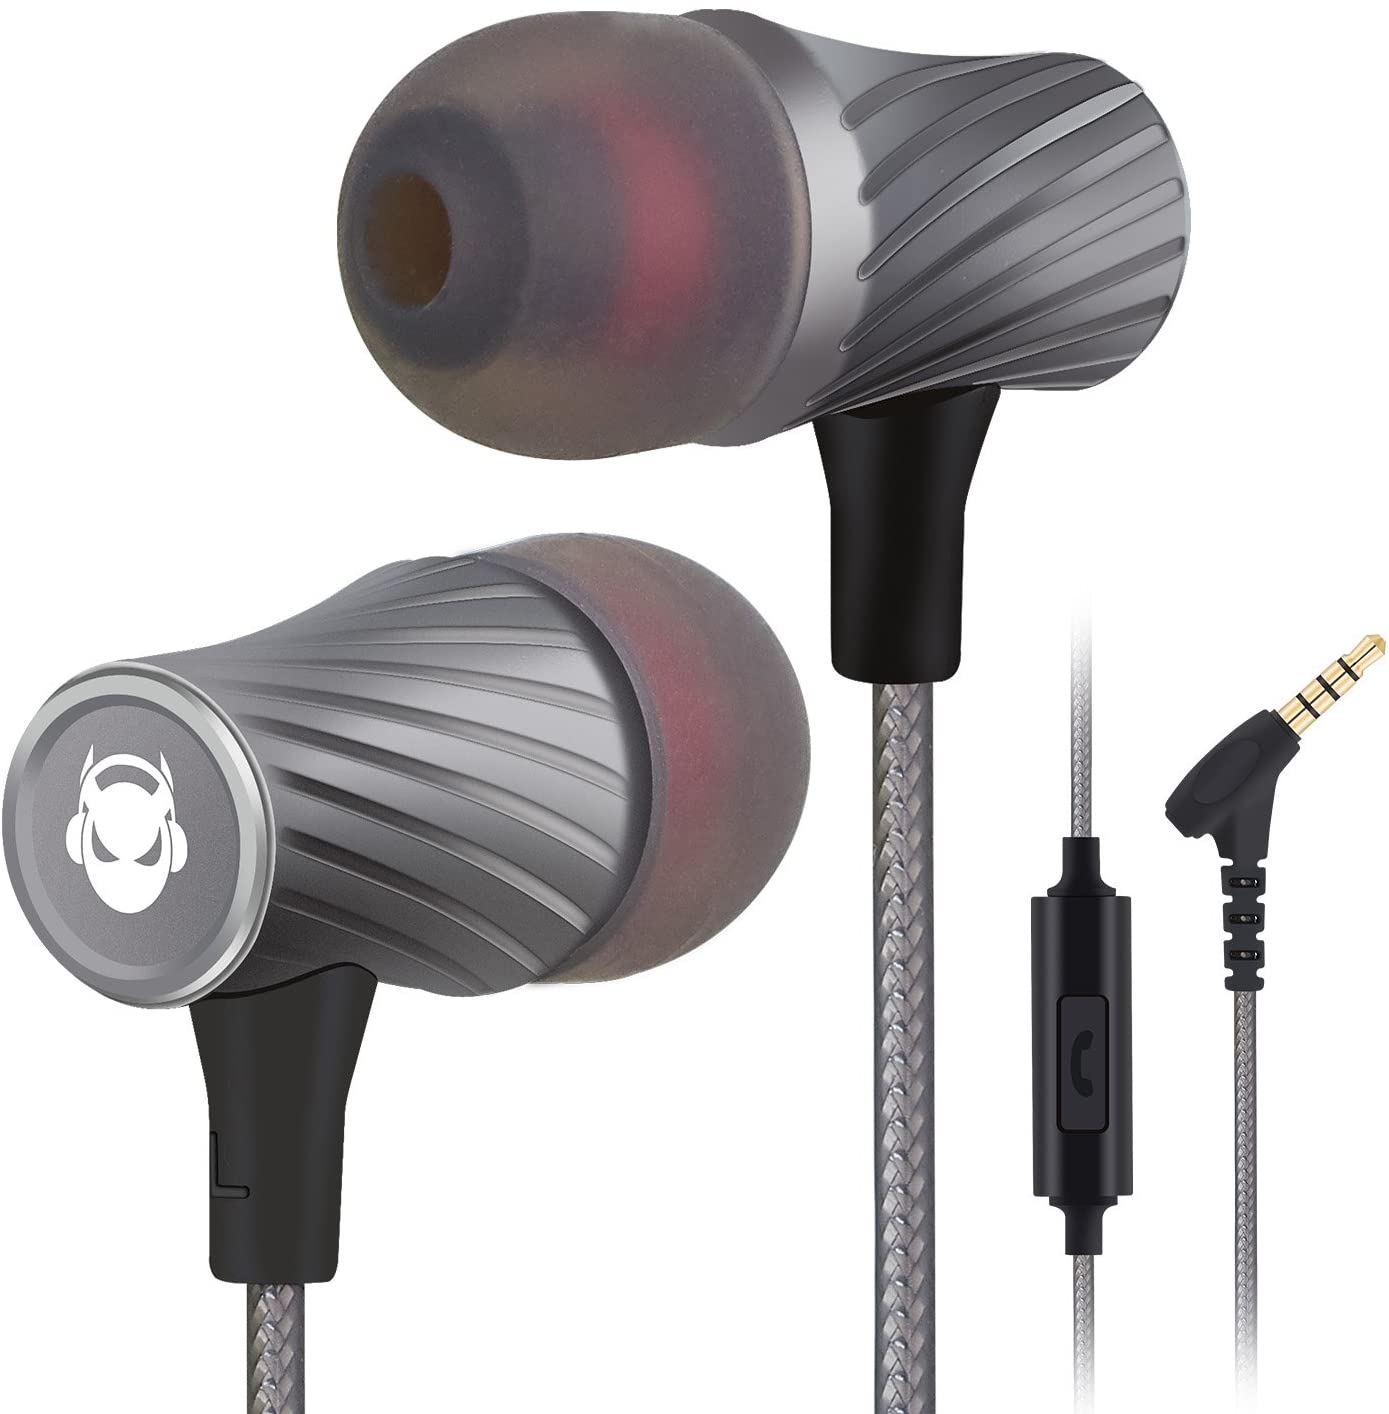 MINDBEAST Super Bass 90%-Noise Isolating Earbuds with Microphone and Case-Amazing Sound Effects and Game Experience